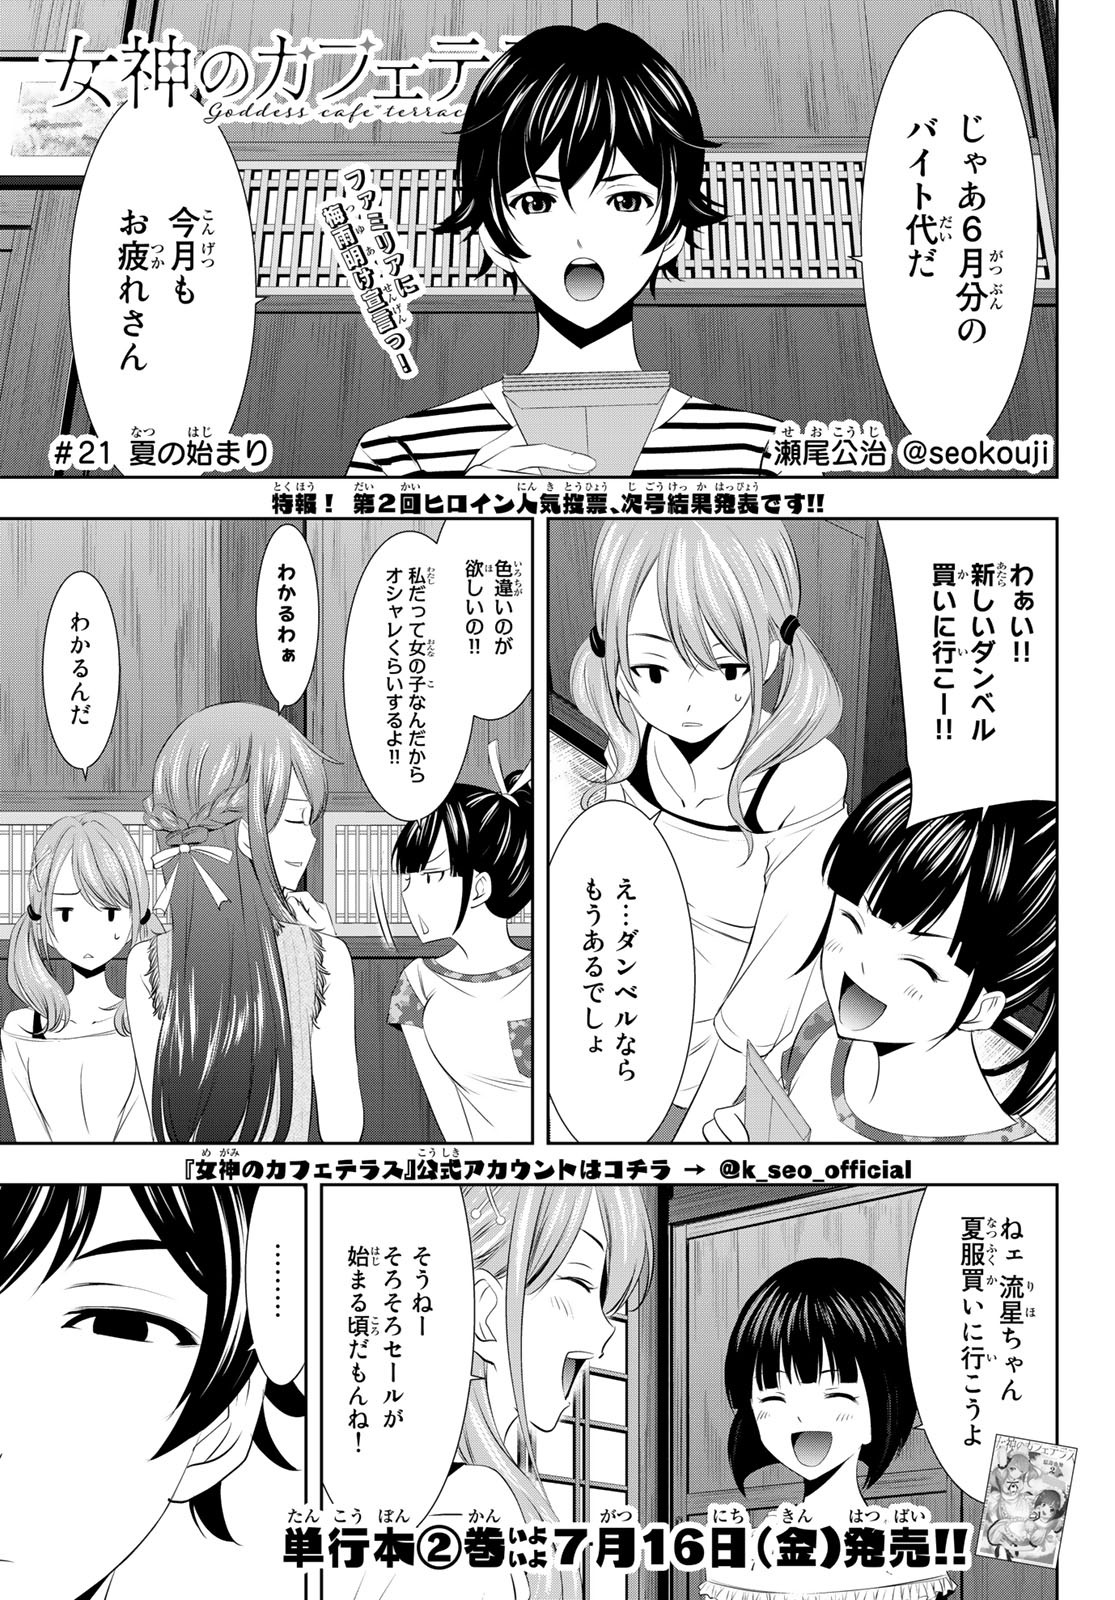 Megami no Cafe Terace - Chapter 21 - Page 1